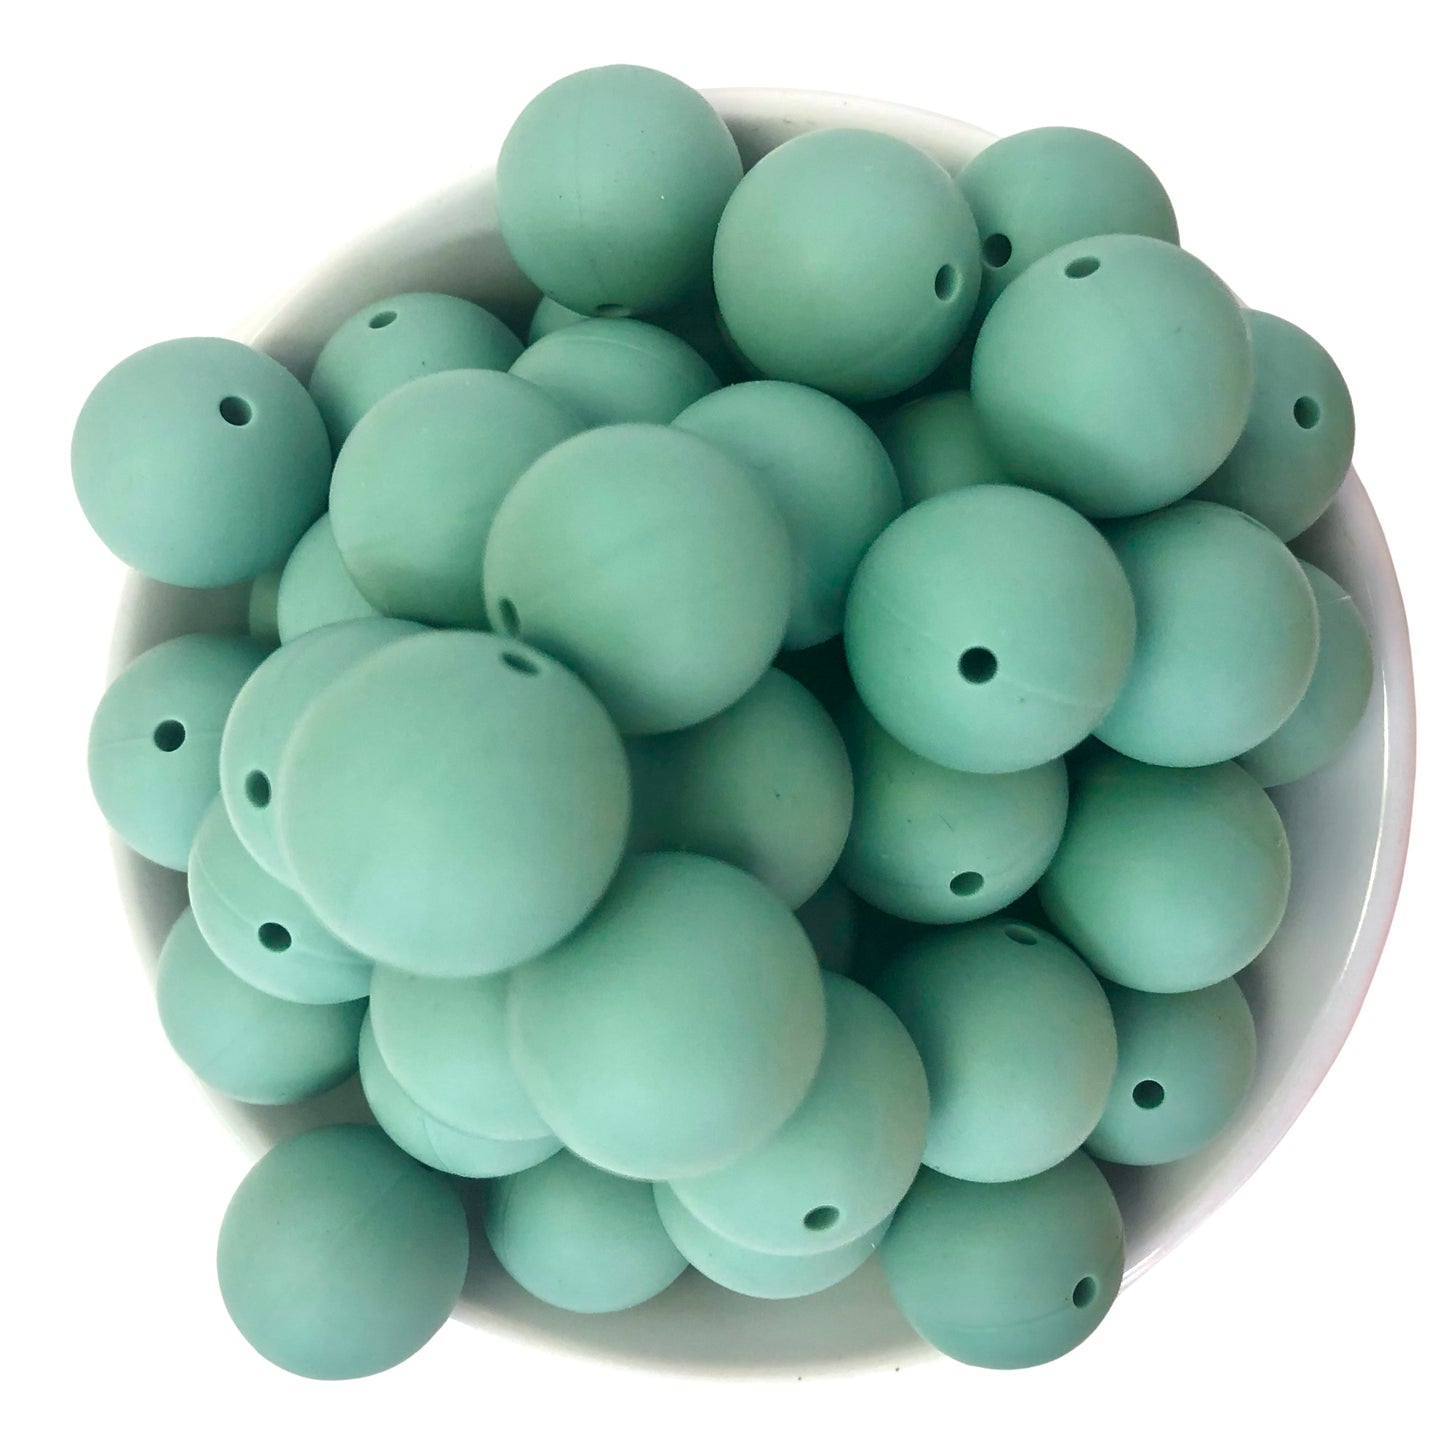 Maritime Trail 19mm Silicone Beads - 5 pk.